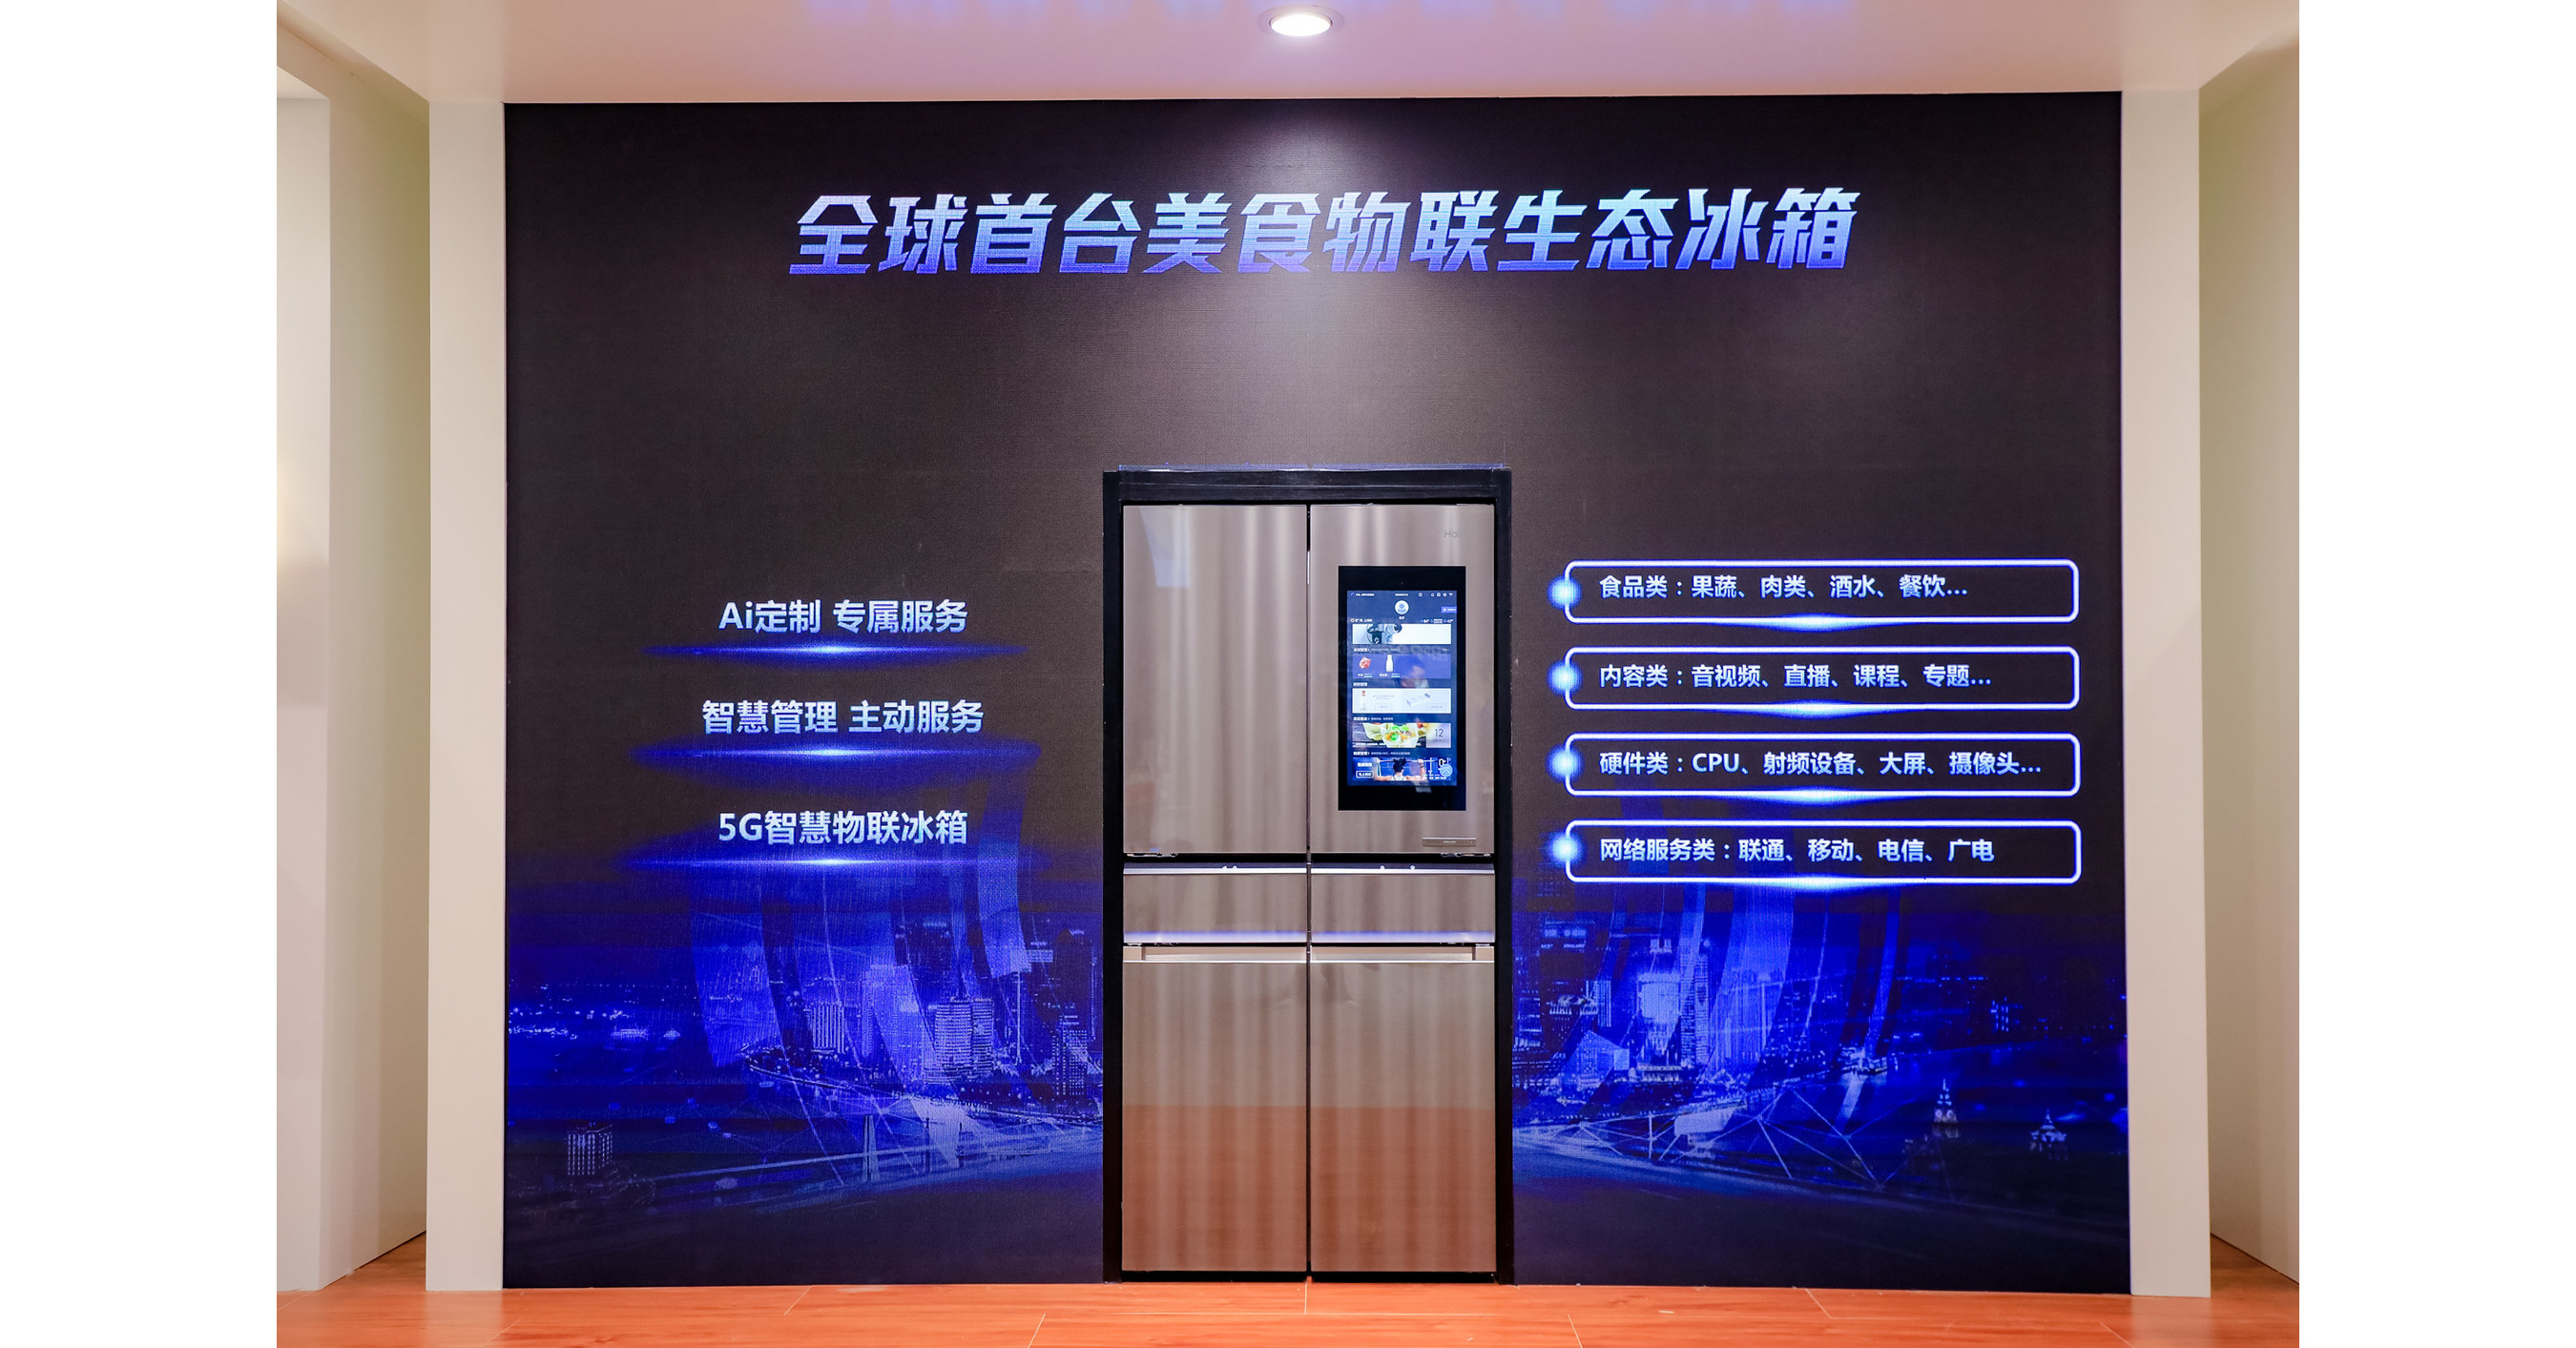 Haier's touchscreen fridge can see your food, recommend a recipe